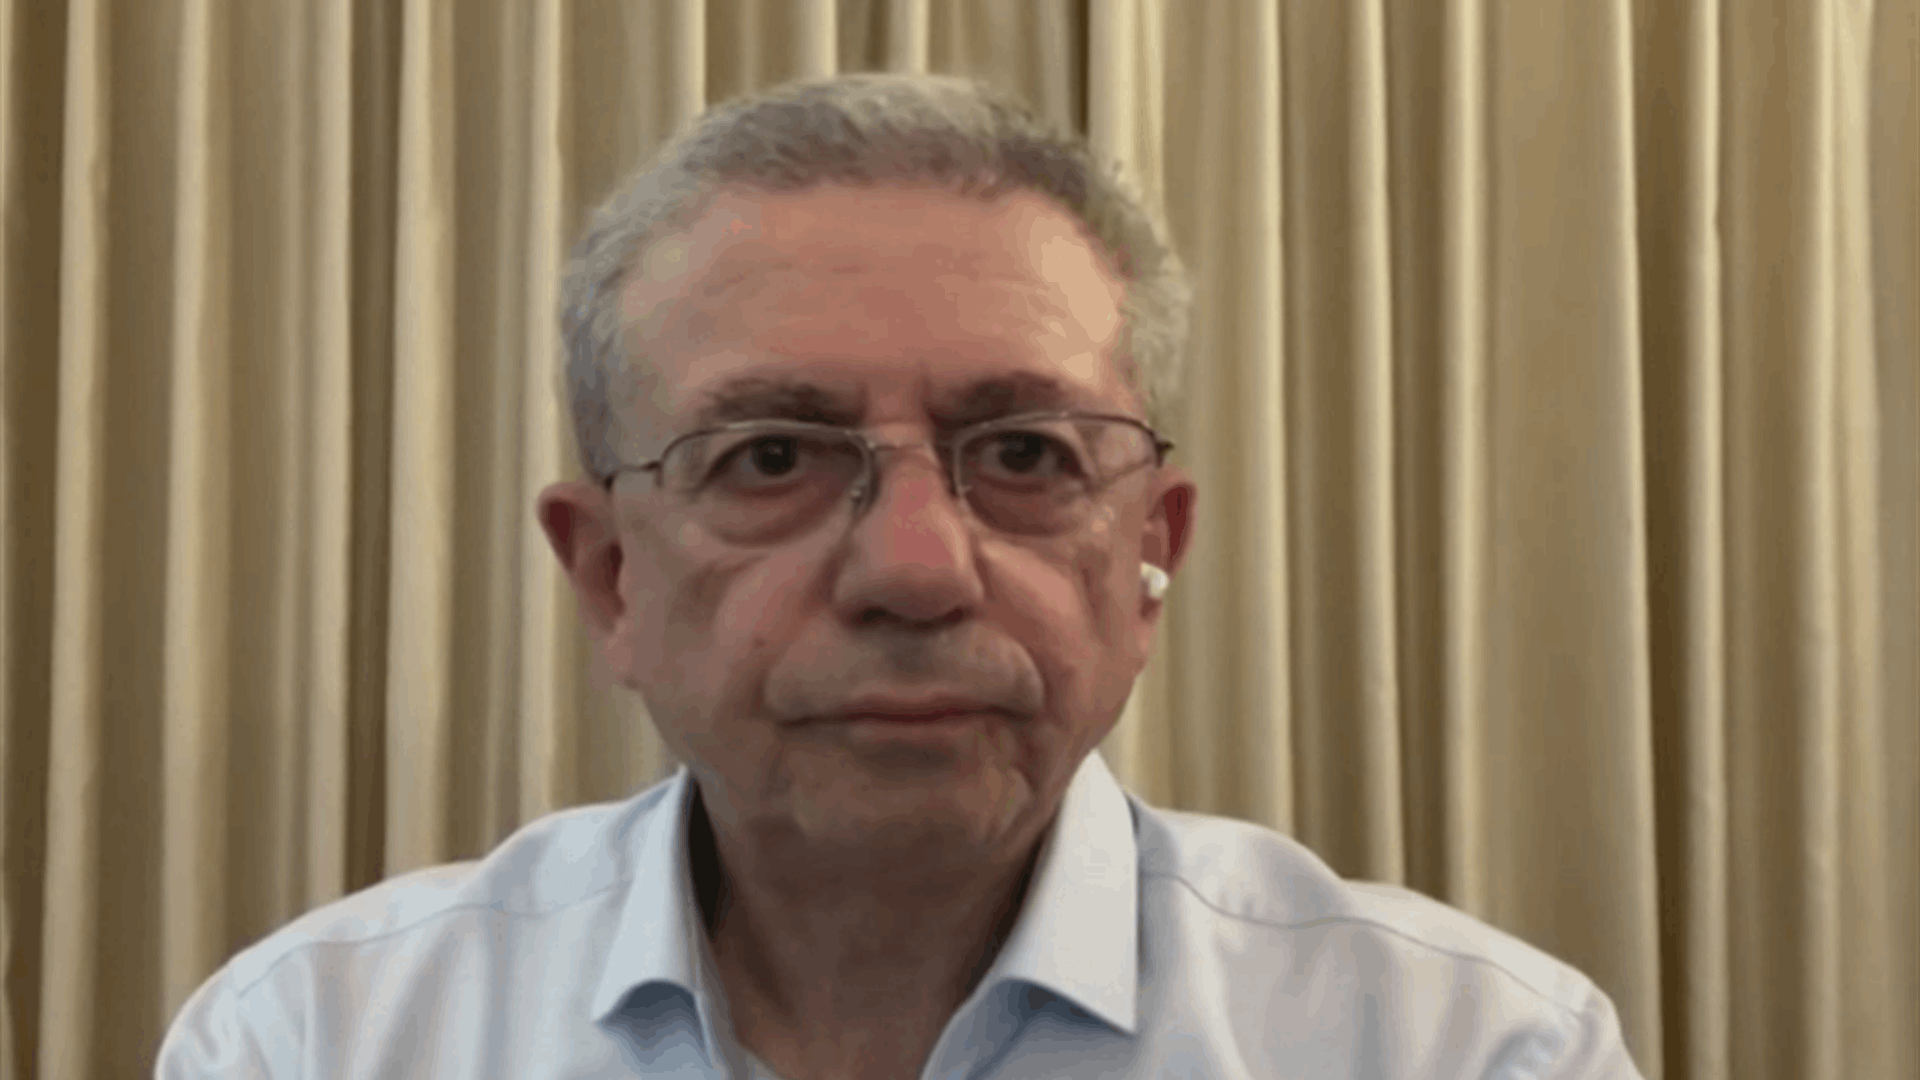 Mustafa Barghouti to LBCI: Netanyahu may provoke conflict with Lebanon for self-interest, not for his people